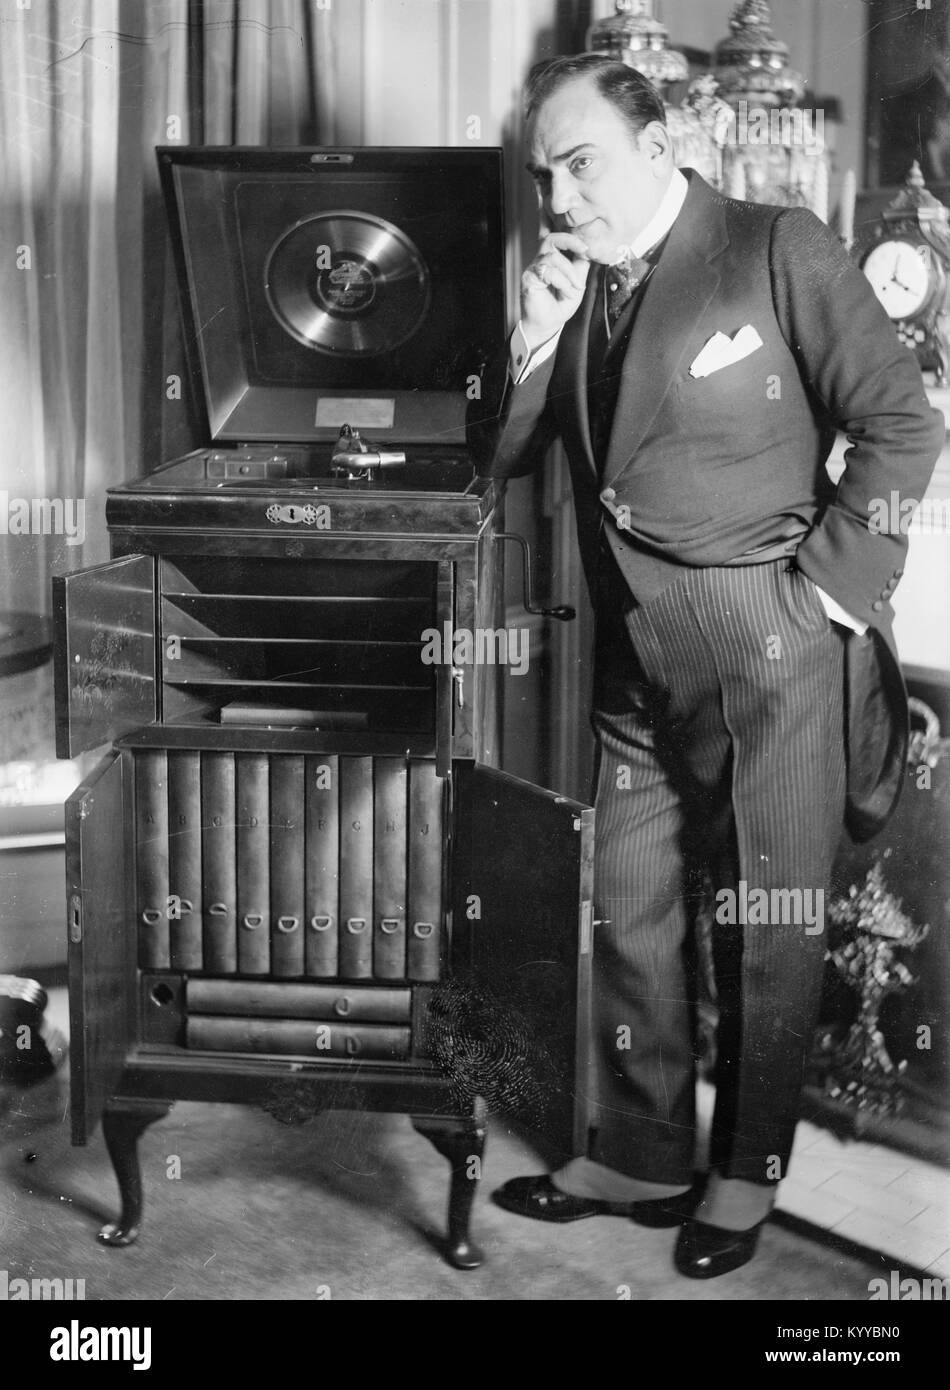 Opera singer Enrico Caruso (1873-1921) with a customized 'Victrola' phonograph which was a wedding gift in 1918. Stock Photo